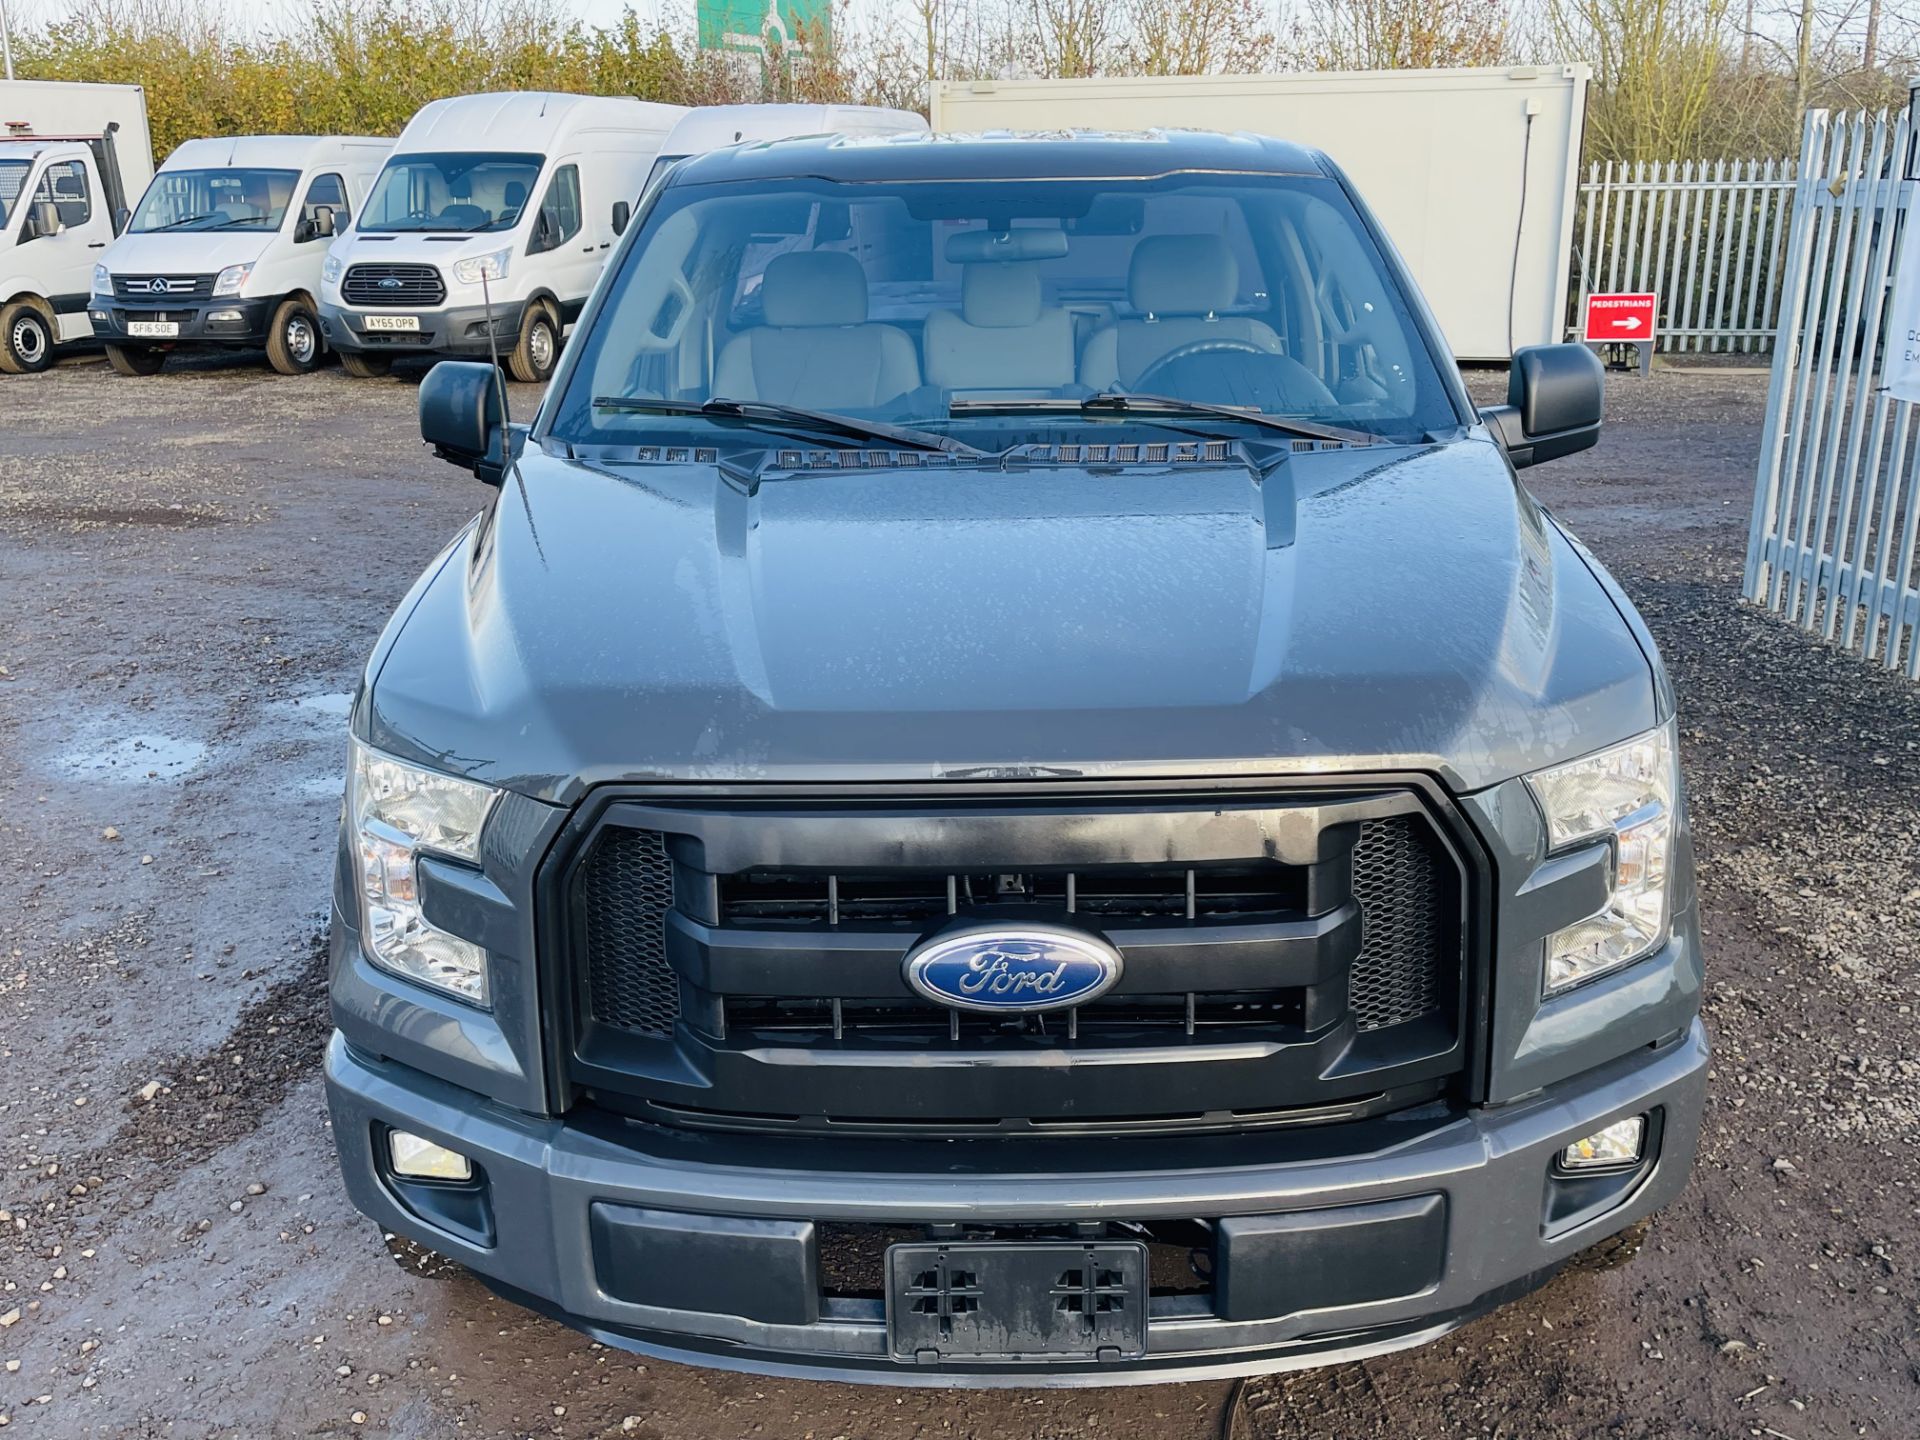 Ford F-150 3.5L V6 XL *Sport Edition '2016 year' Single Cab - Short Bed **ULTRA RARE** - Image 19 of 35